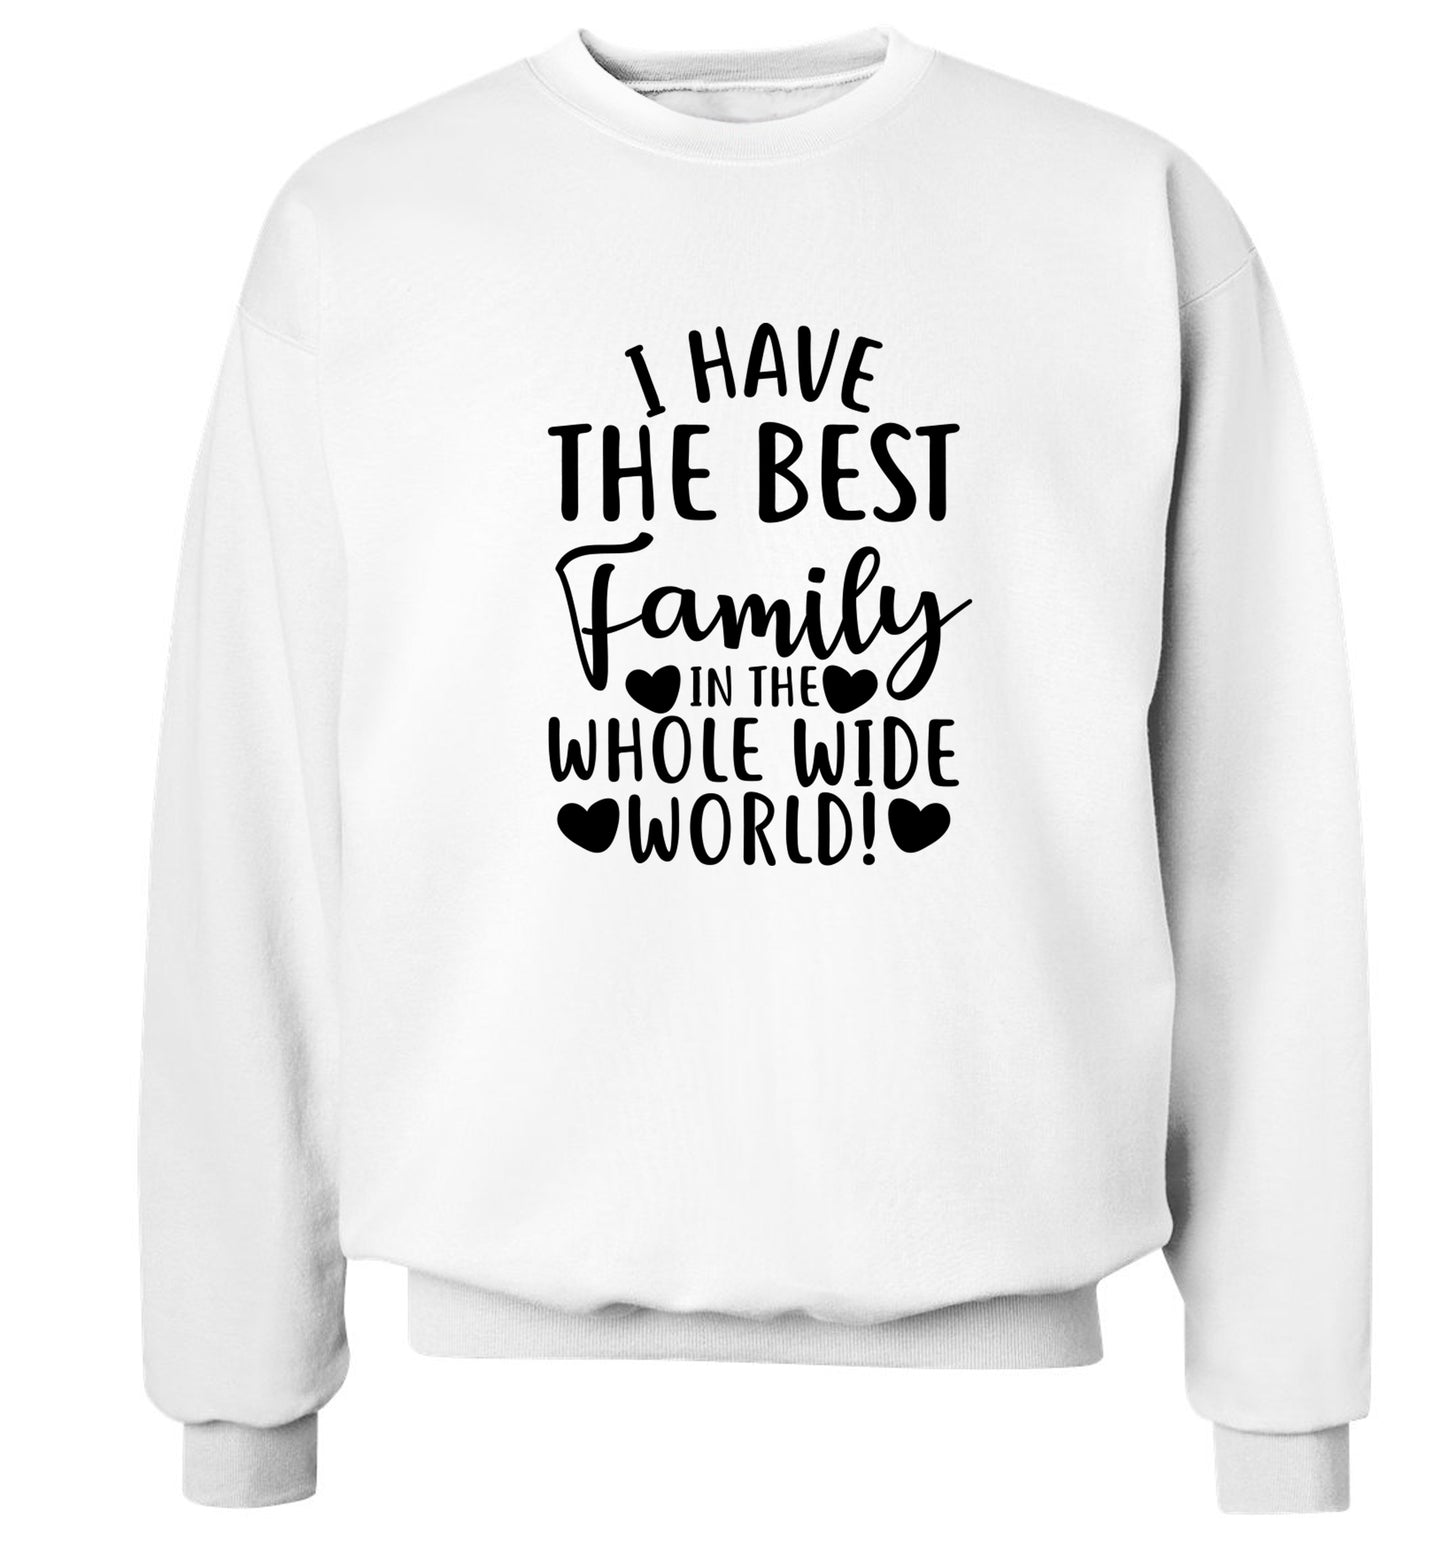 I have the best family in the whole wide world! Adult's unisex white Sweater 2XL